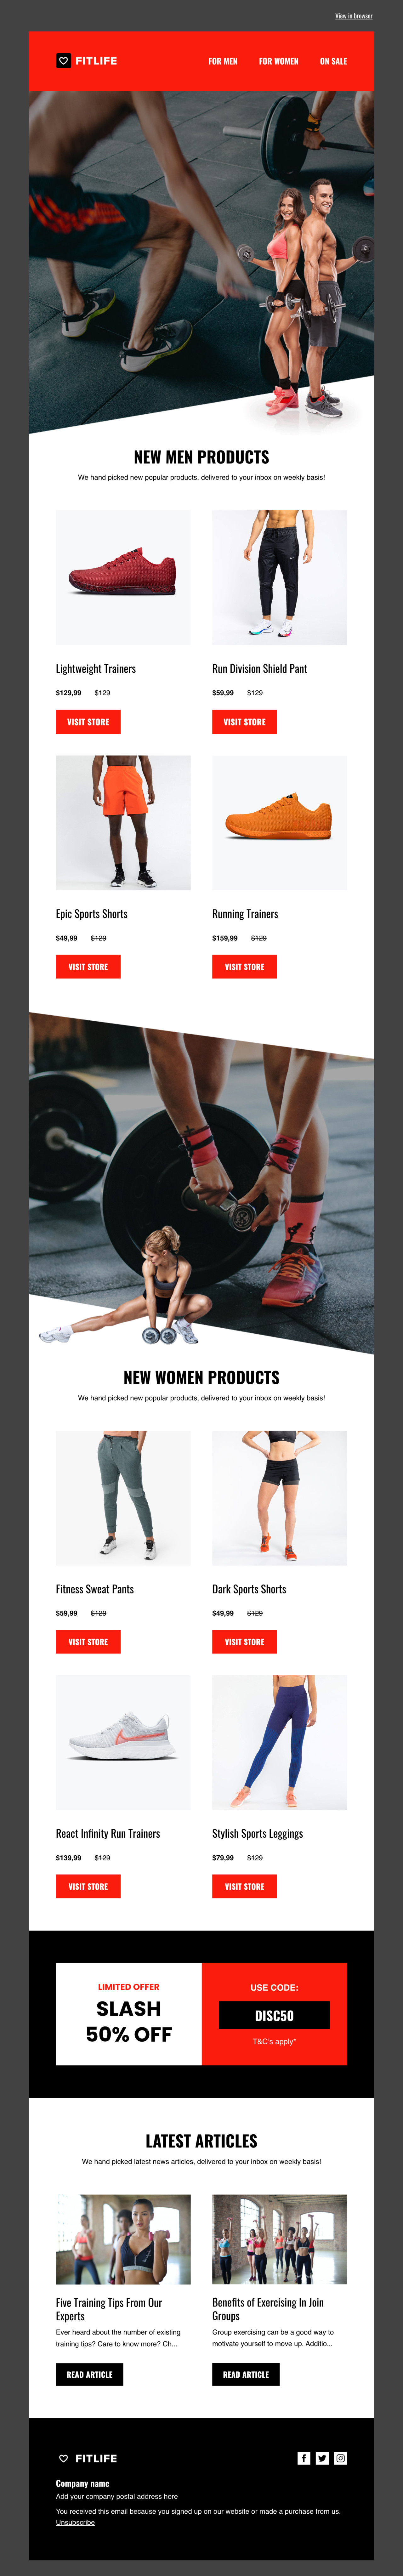 Gym equipment template - Made by MailerLite